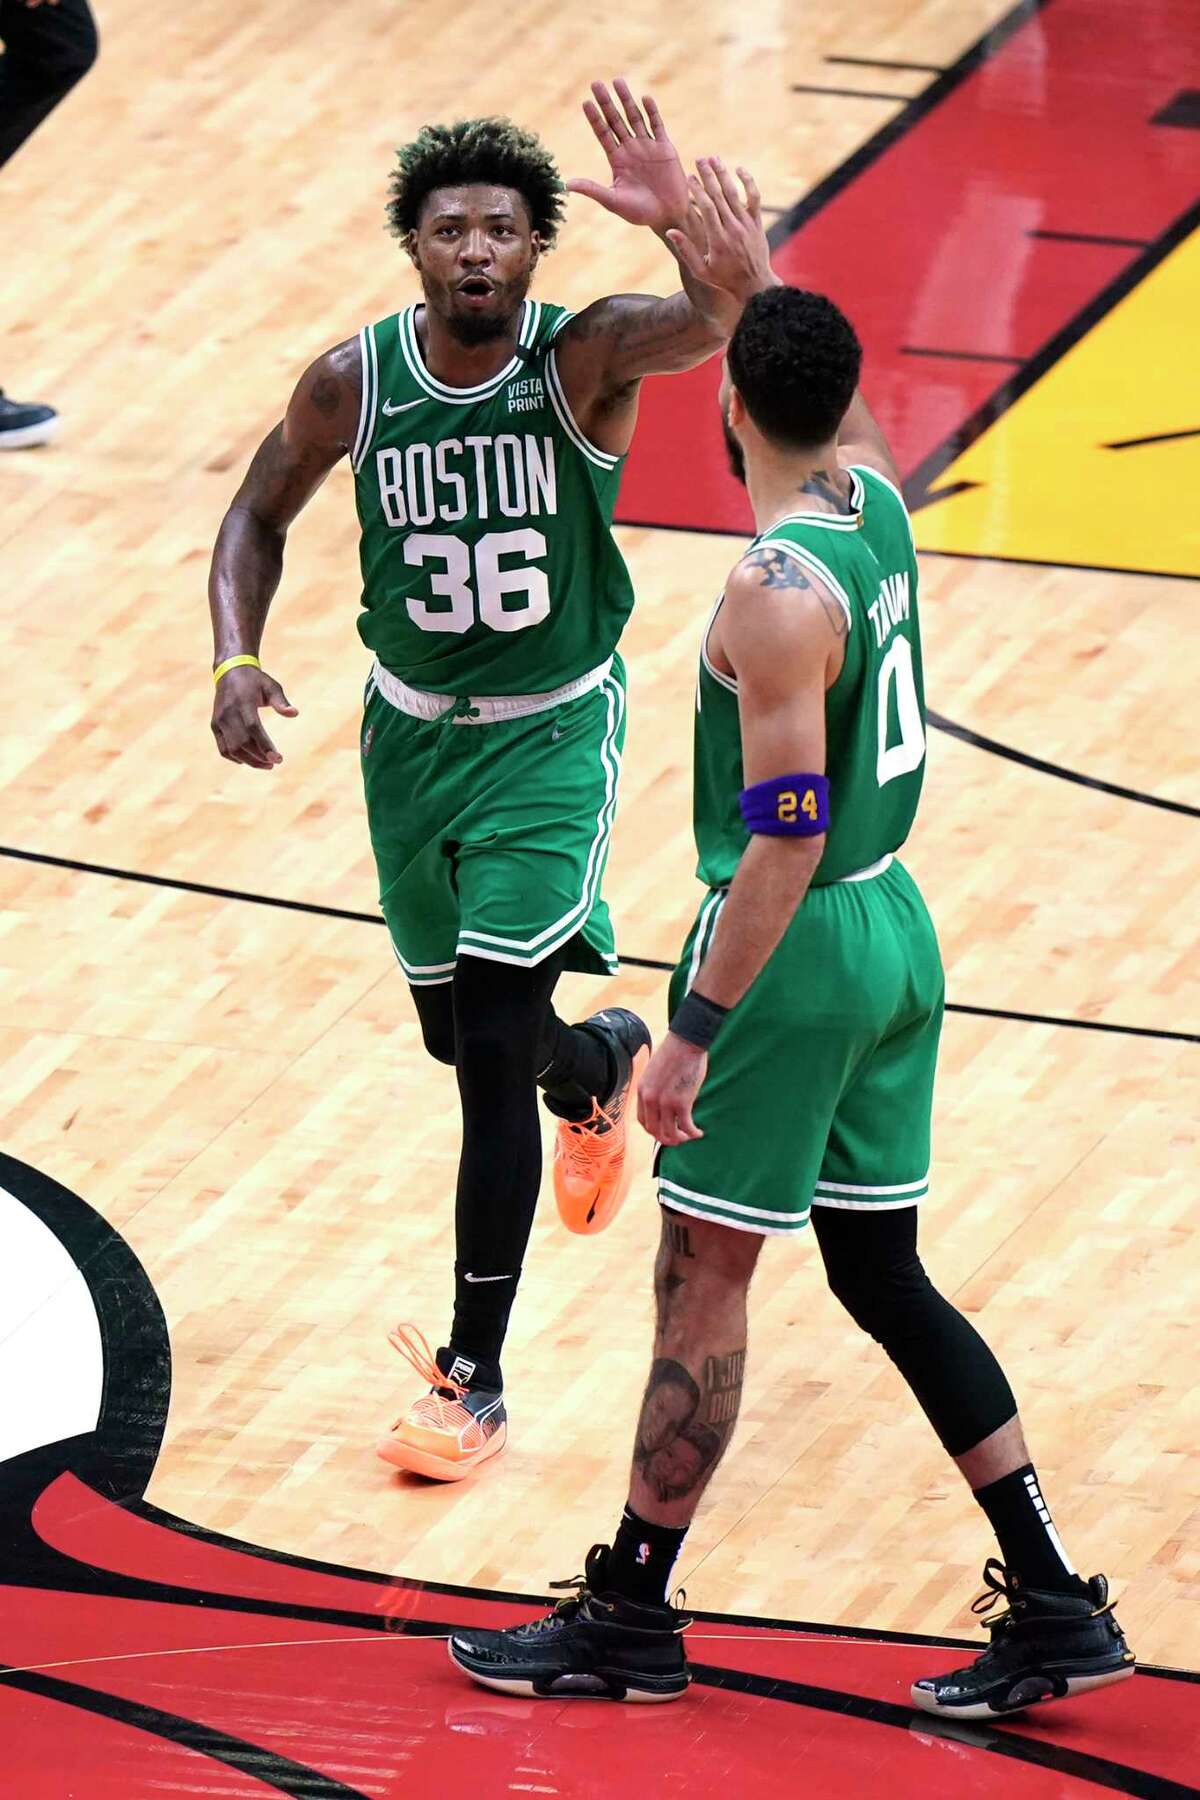 Boston Celtics guard Marcus Smart (36) and forward Jayson Tatum (0) celebrate after scoring during the first half of Game 7 of the NBA basketball Eastern Conference finals playoff series against the Miami Heat, Sunday, May 29, 2022, in Miami.